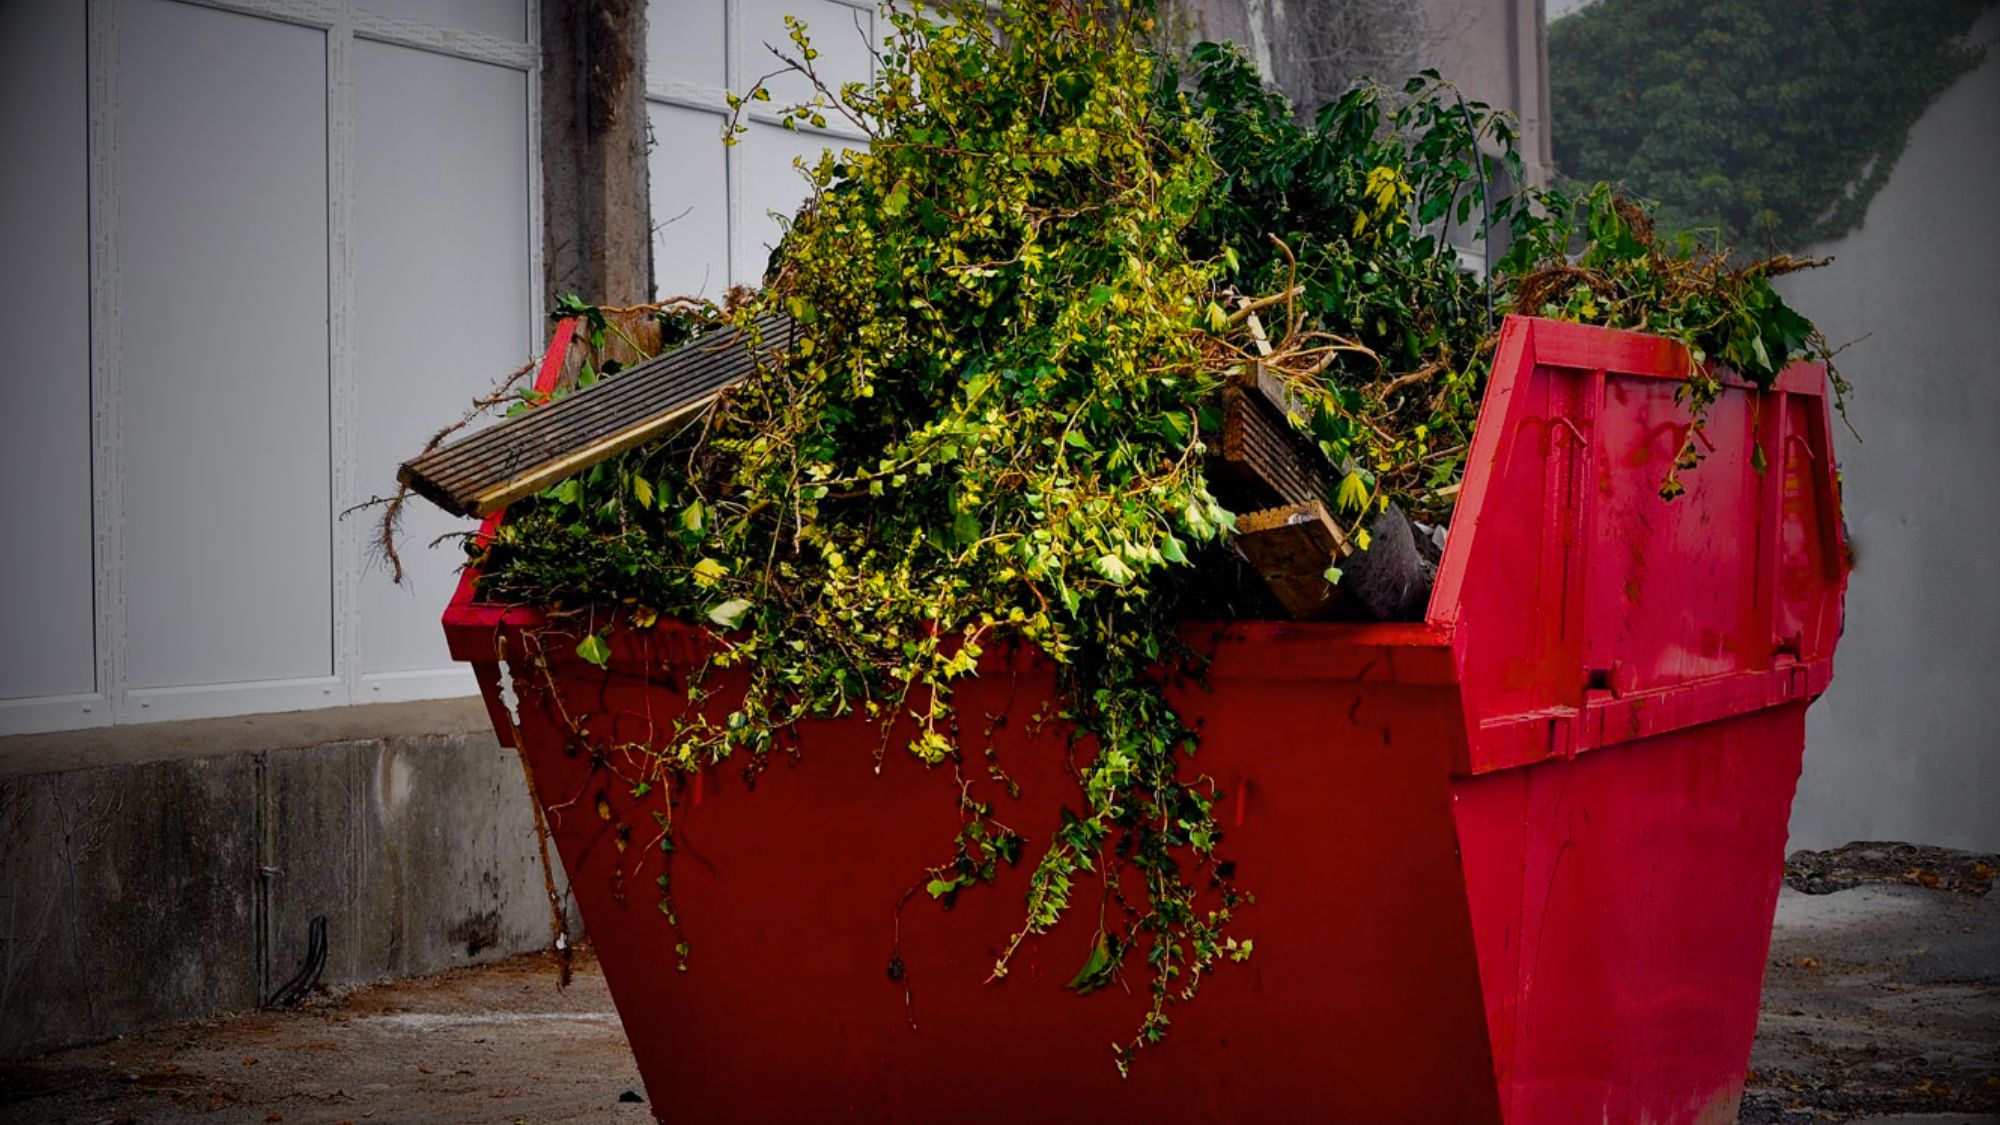 A red dumpster filled with plants, representing a unique combination of waste disposal and skip hire in Manchester